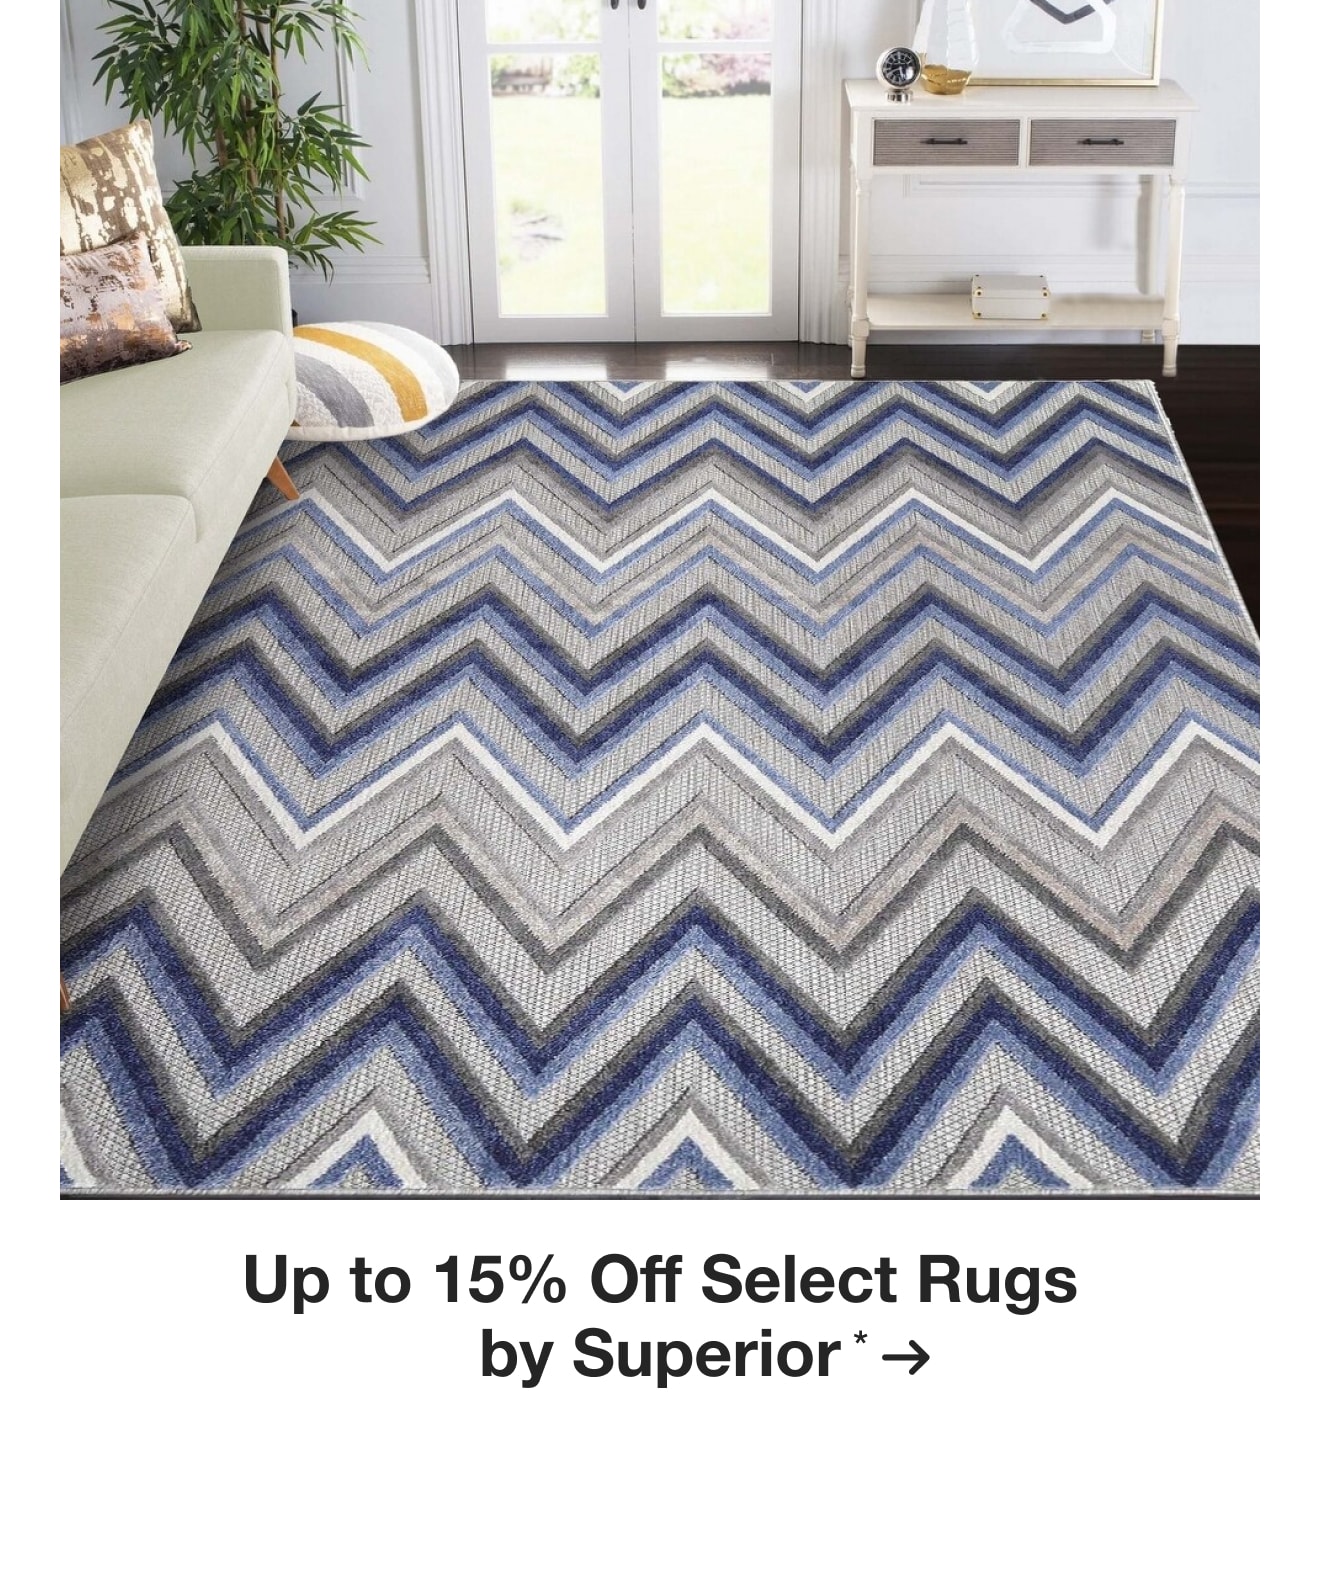 Up to 15% Off Select Rugs by Superior*